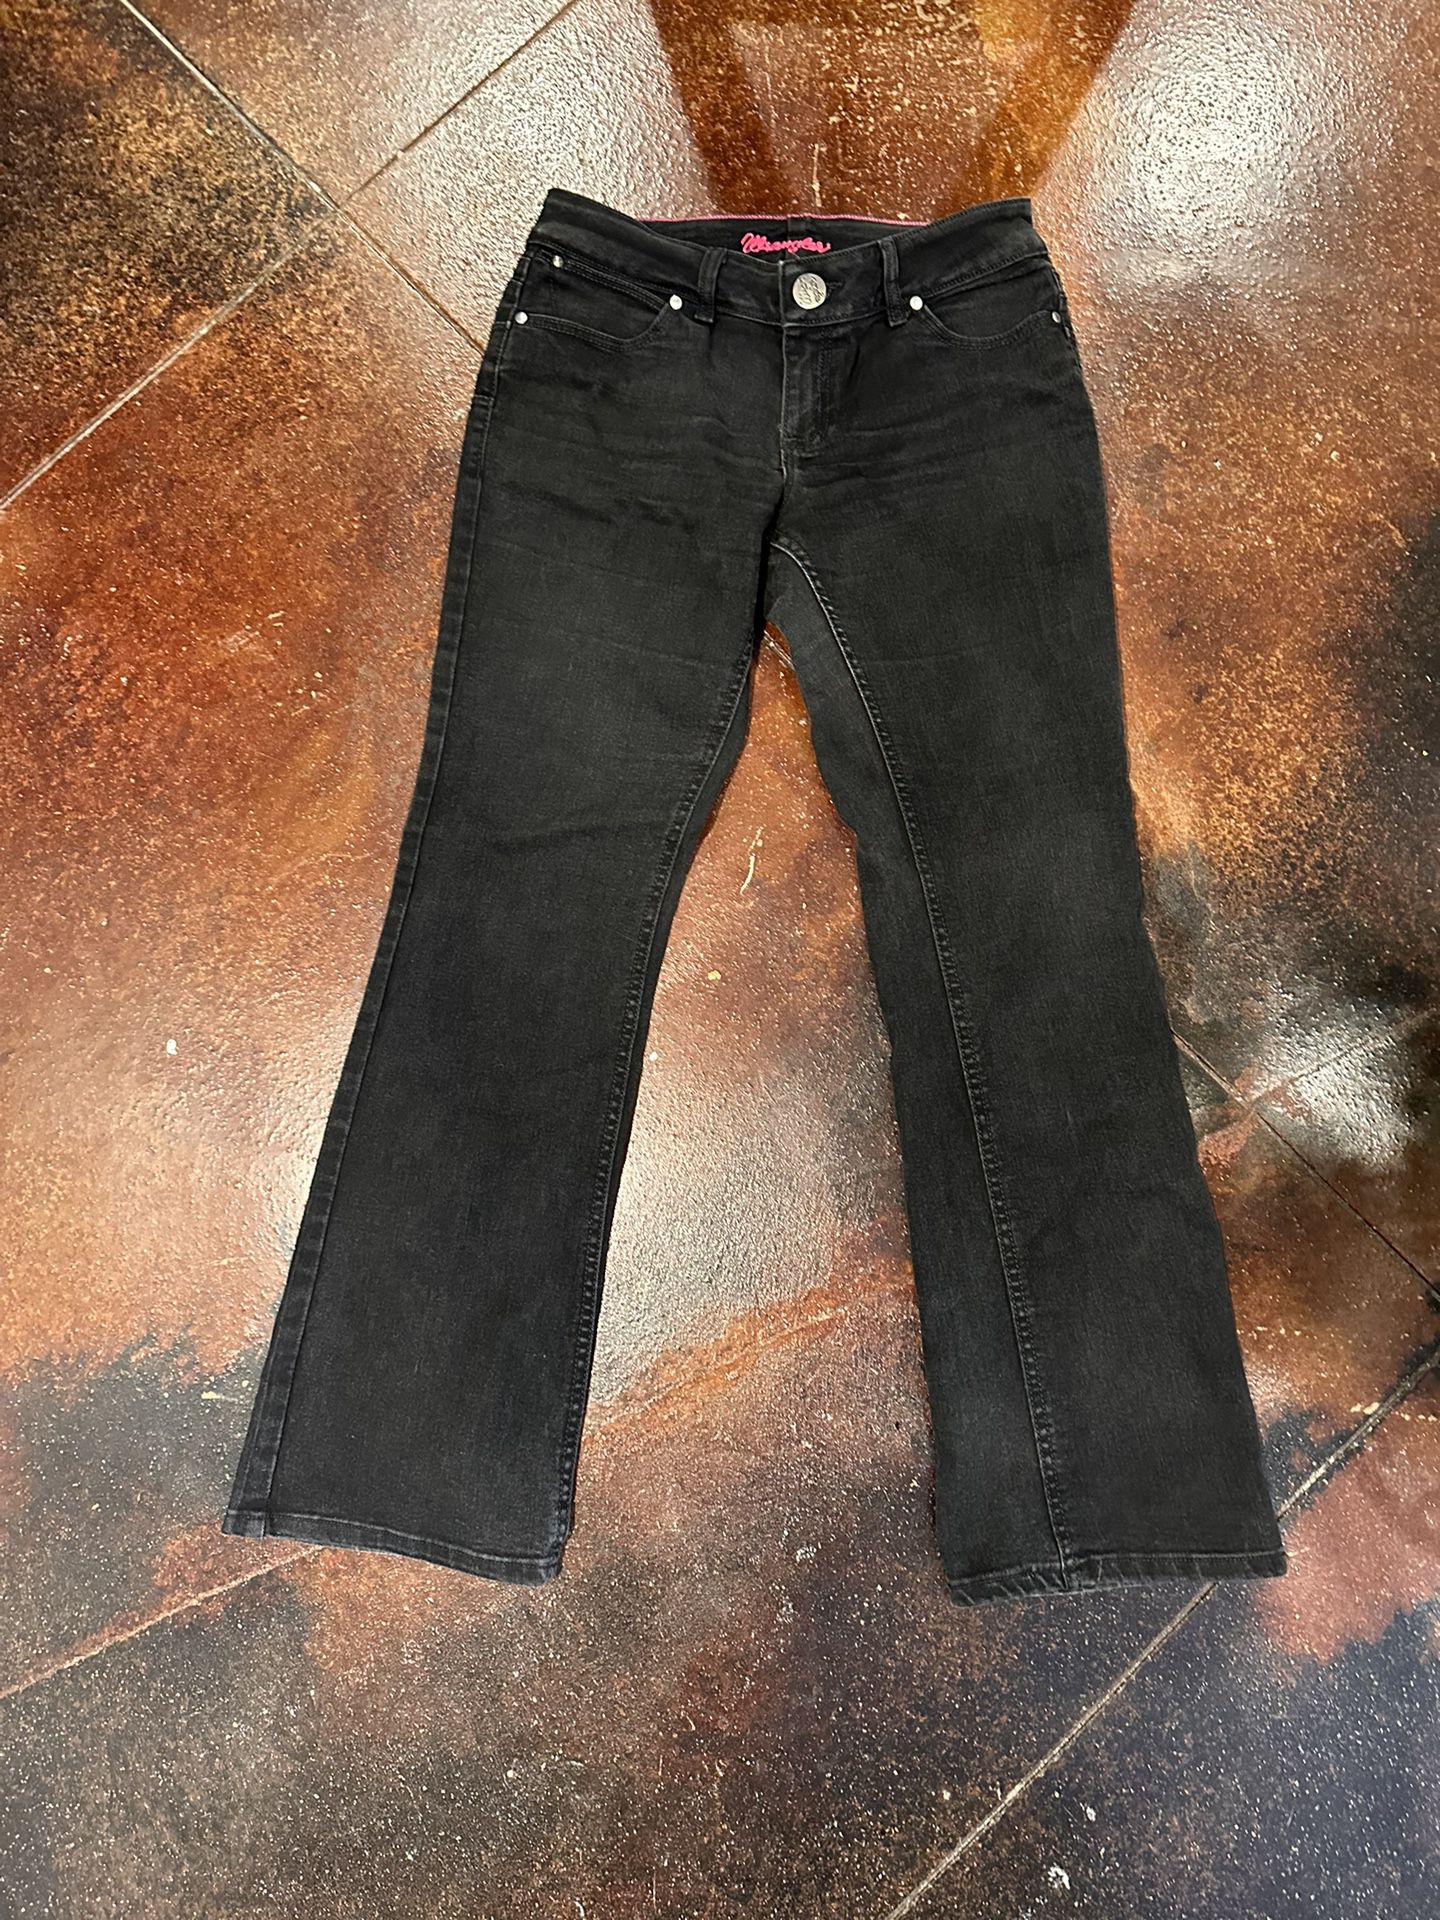 Mens Jeans 34x32 (7pairs) Wranglers for Sale in St. Augustine, FL - OfferUp